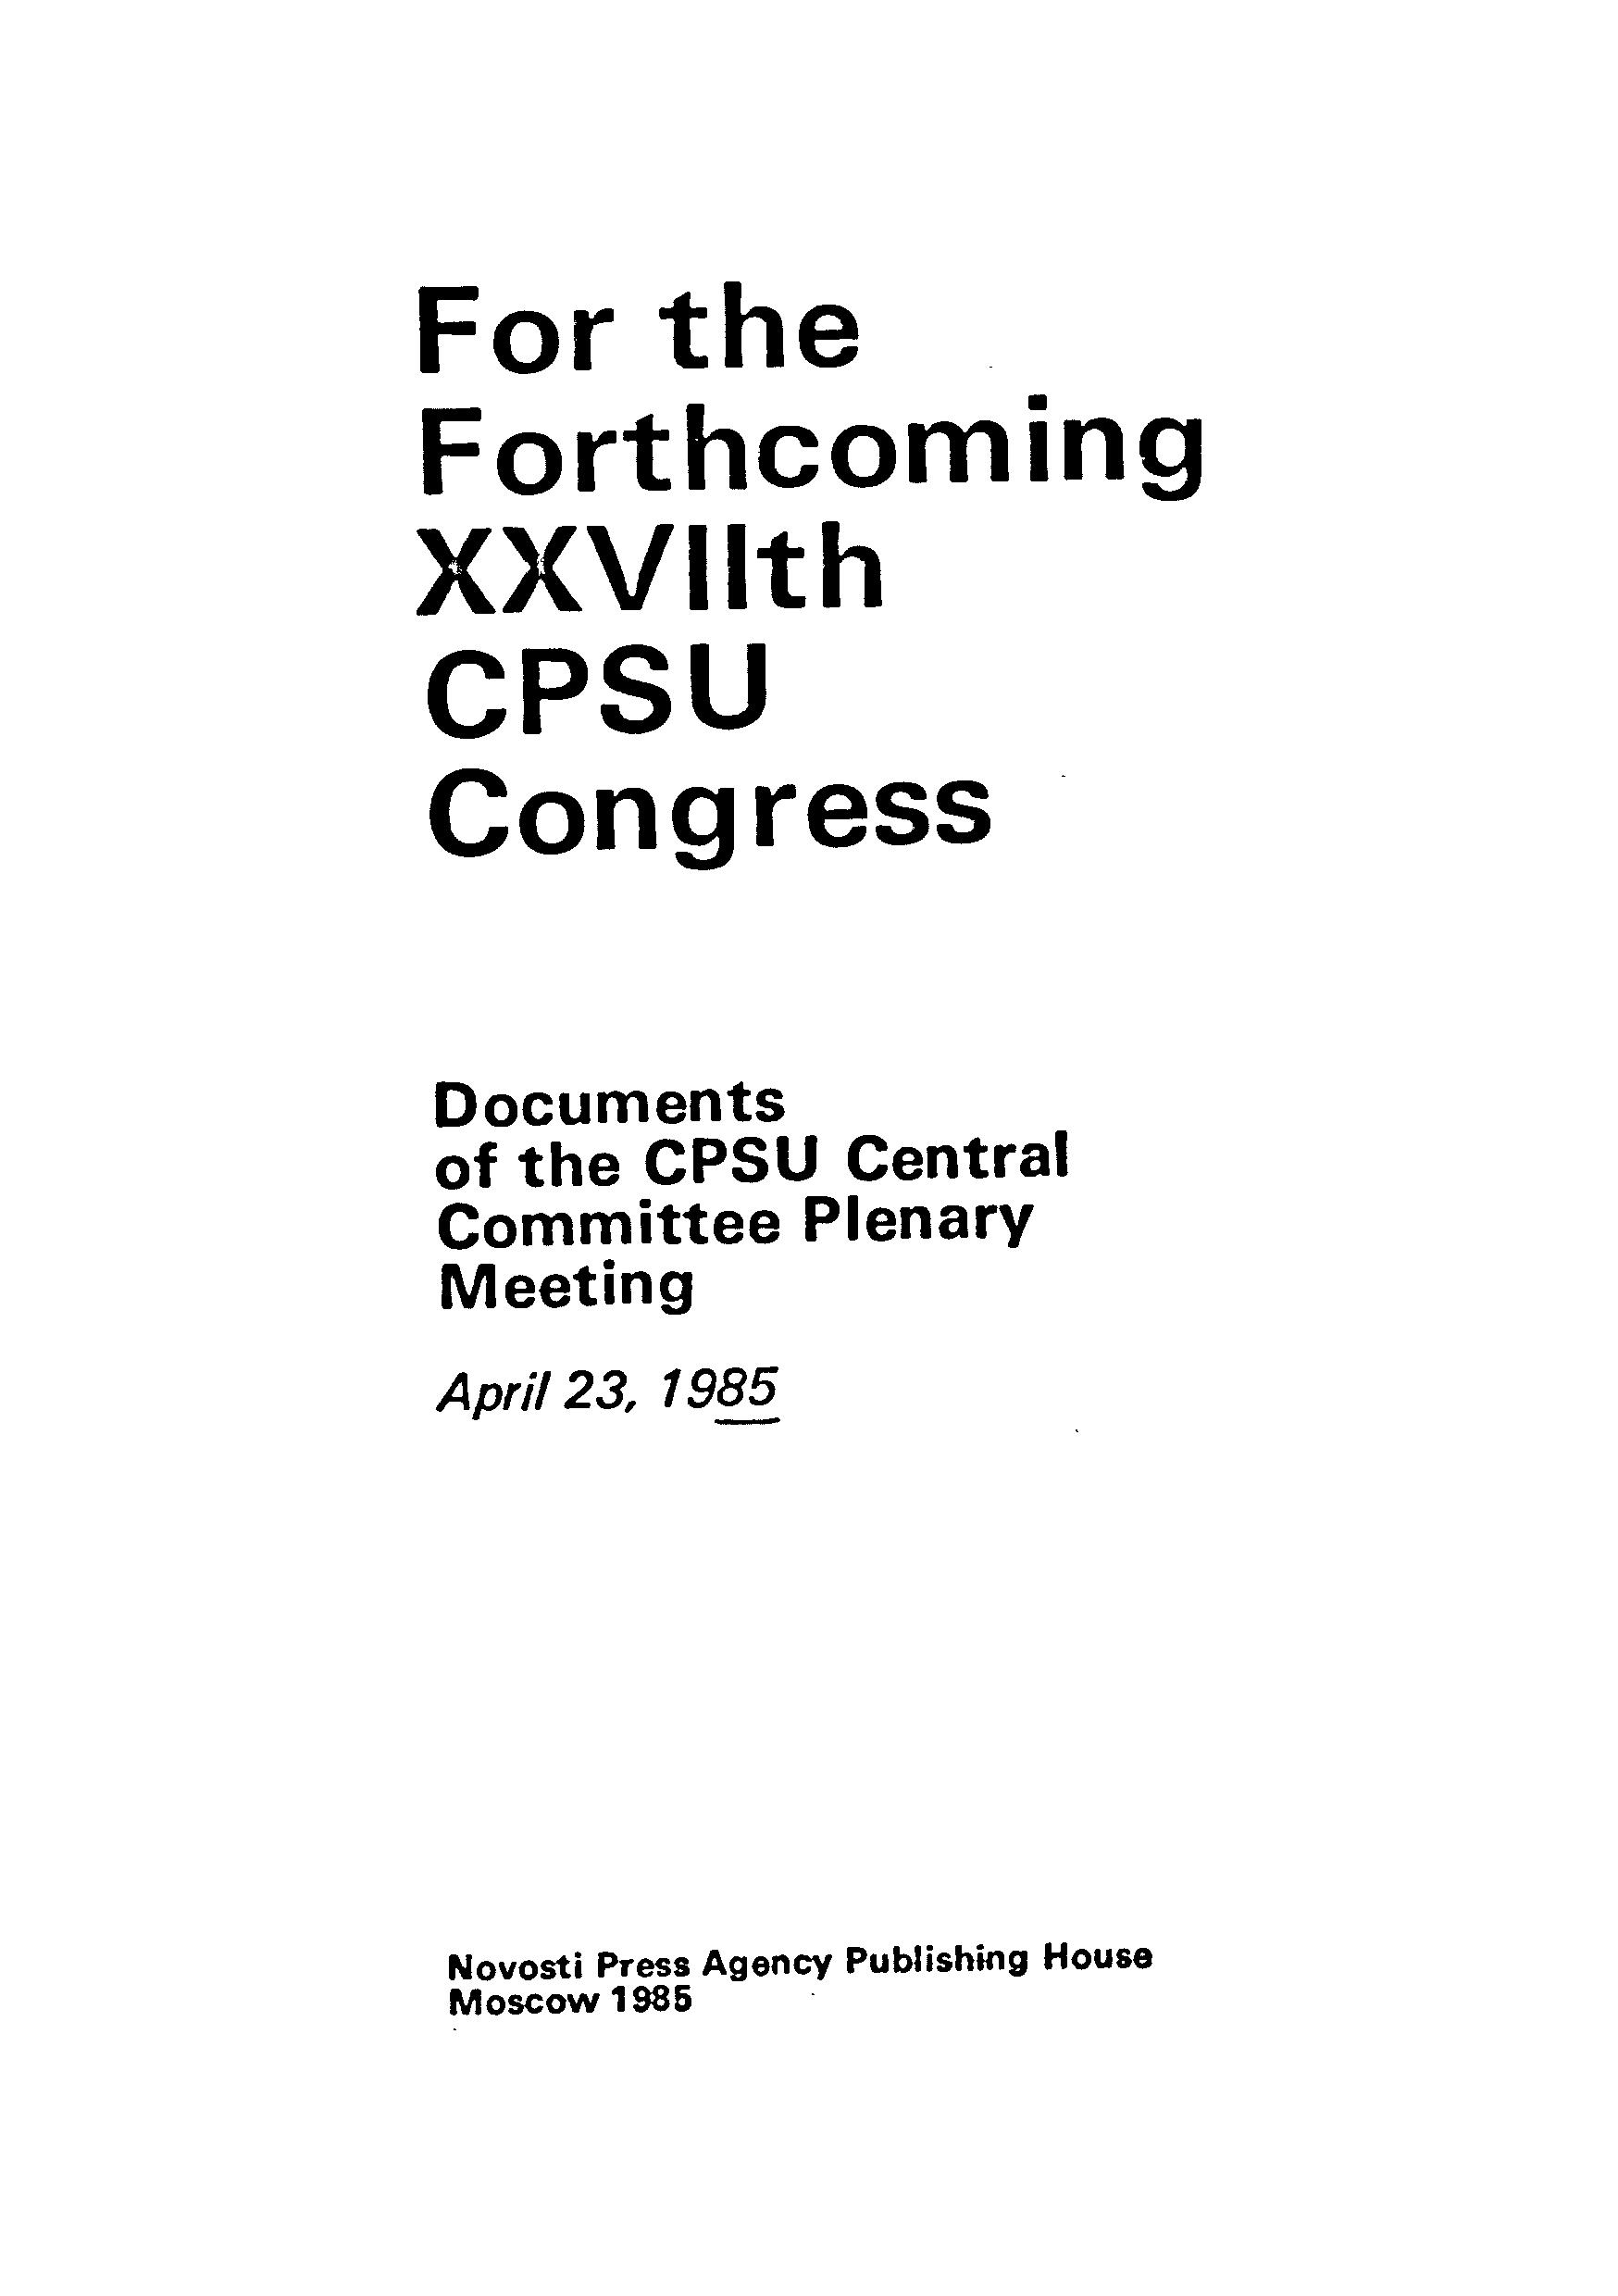 FOR THE FORTHCOMINGM XXVII th CPSU CONGRESS april 23,1985